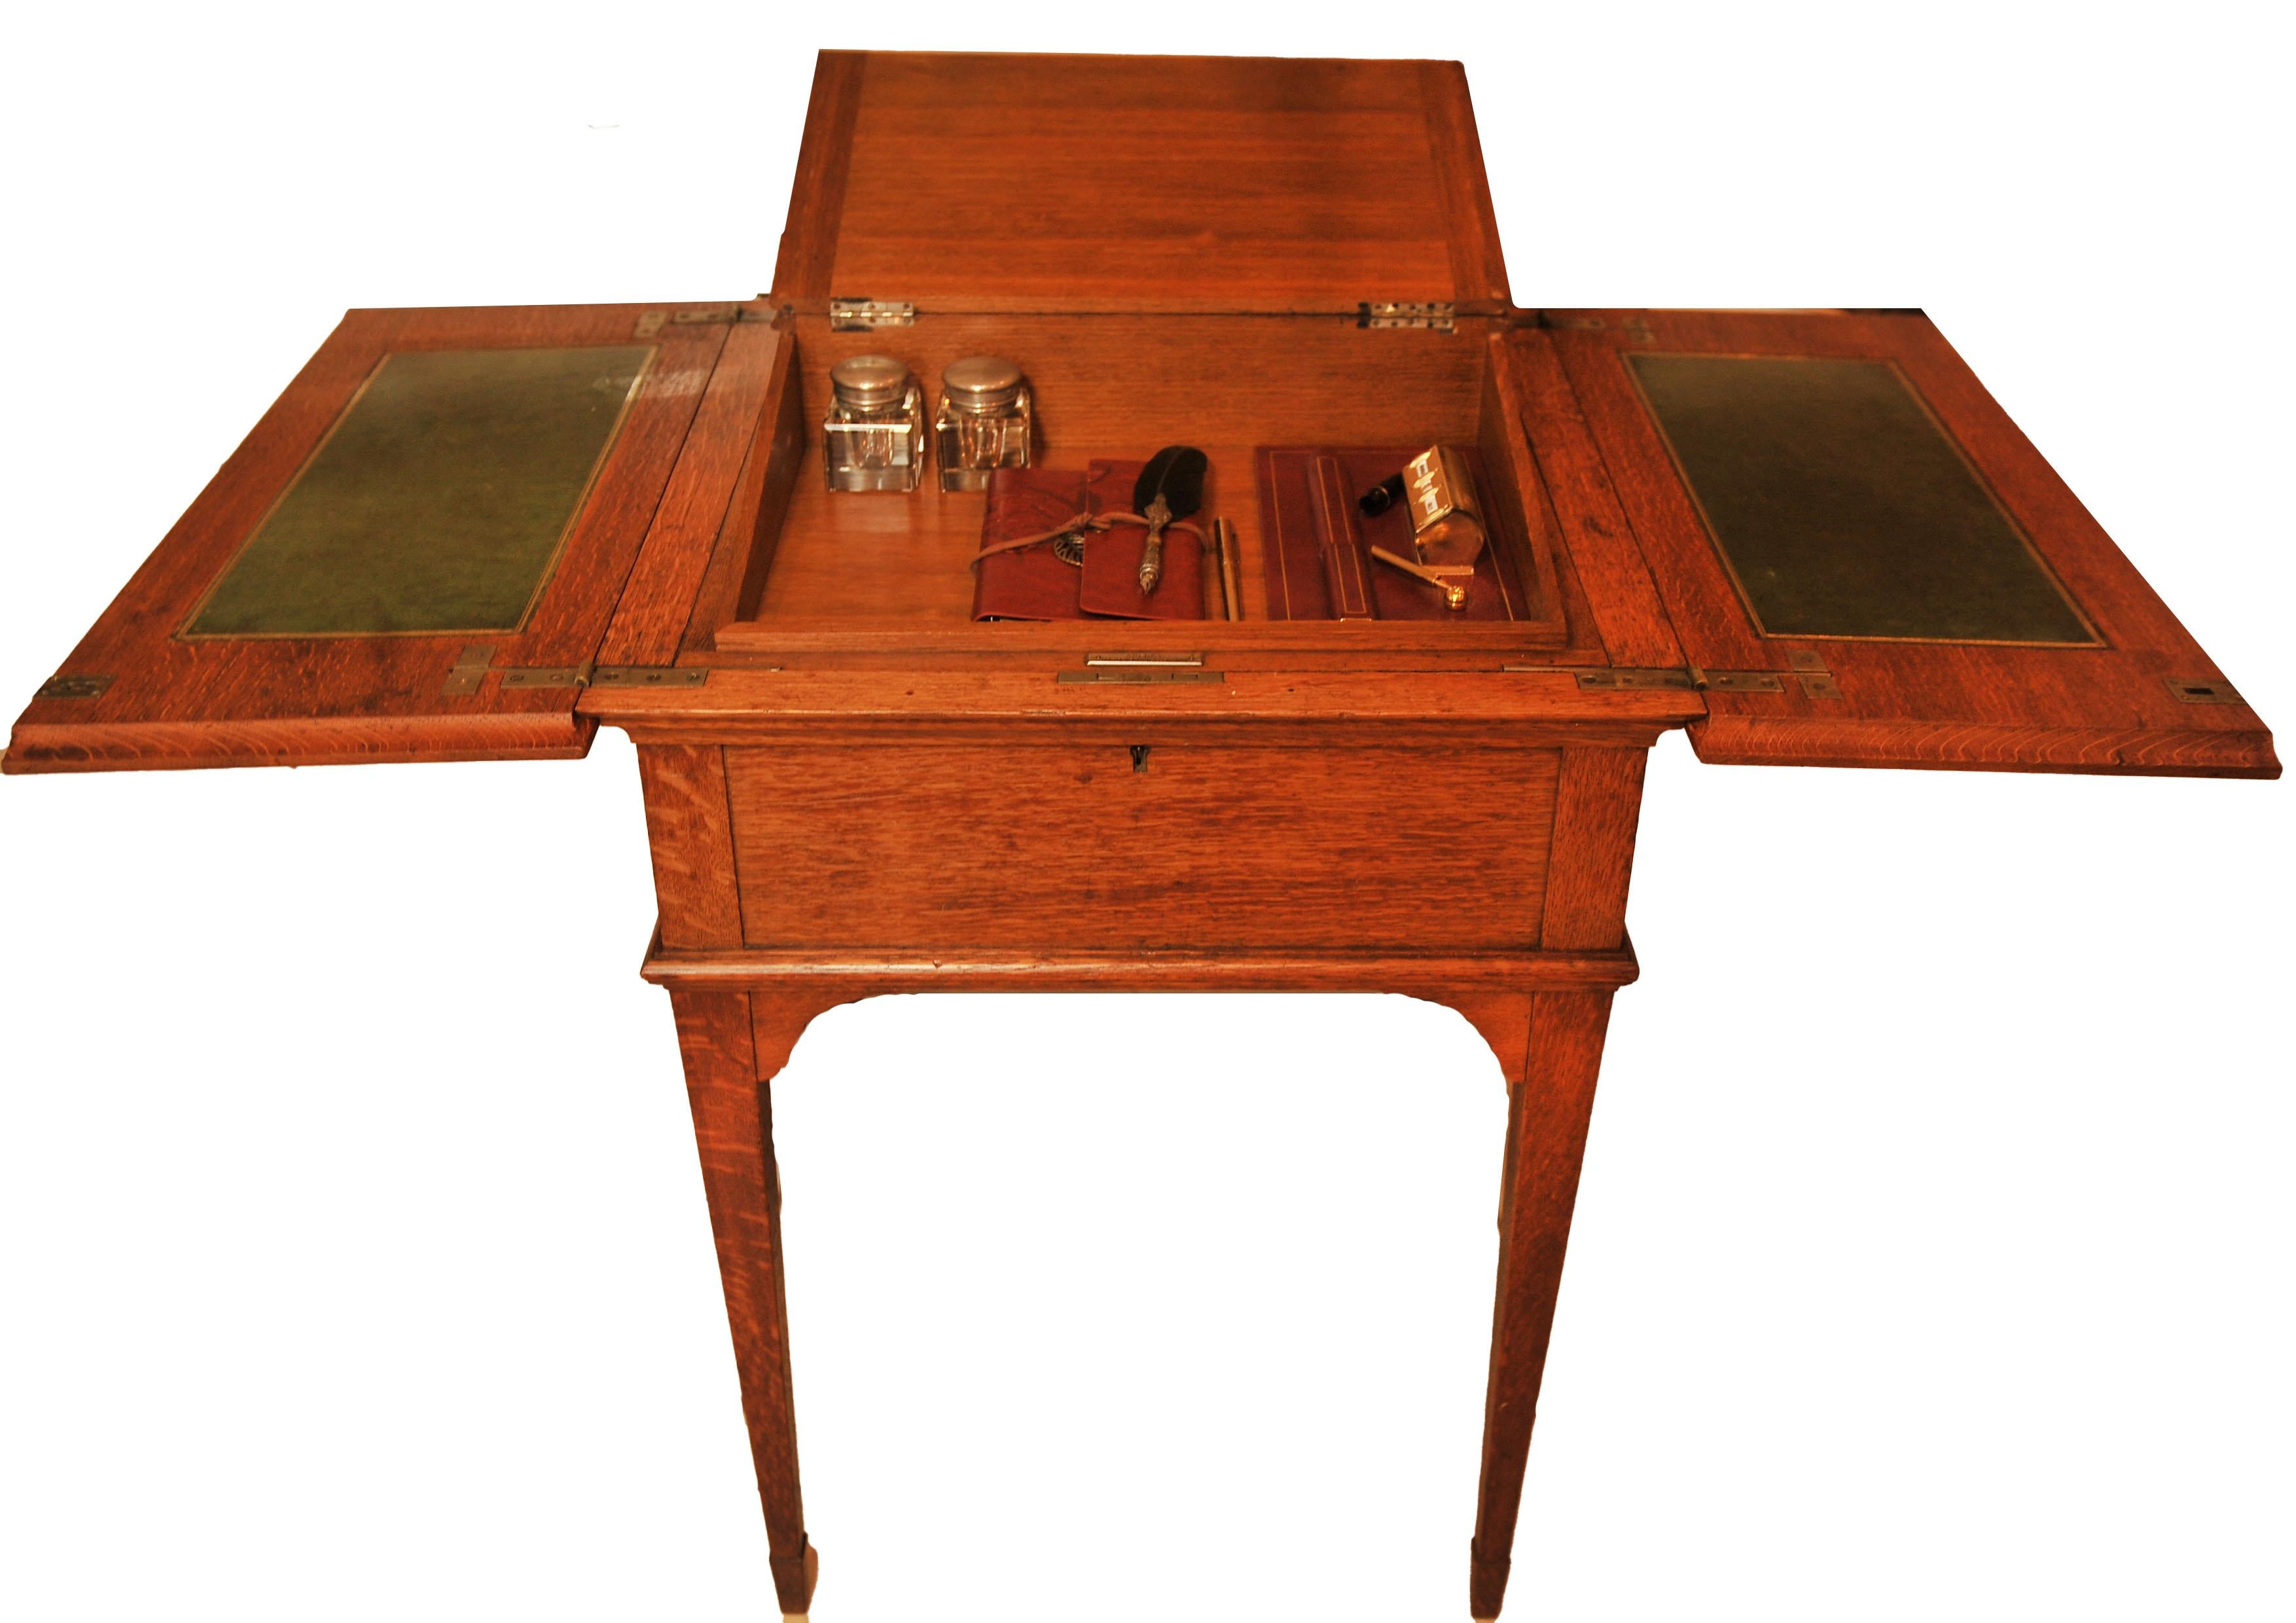 Hand-Crafted Asprey & Co. London Oak & Tooled Racing Green Leather Pop-Up Writing Desk 1920s For Sale